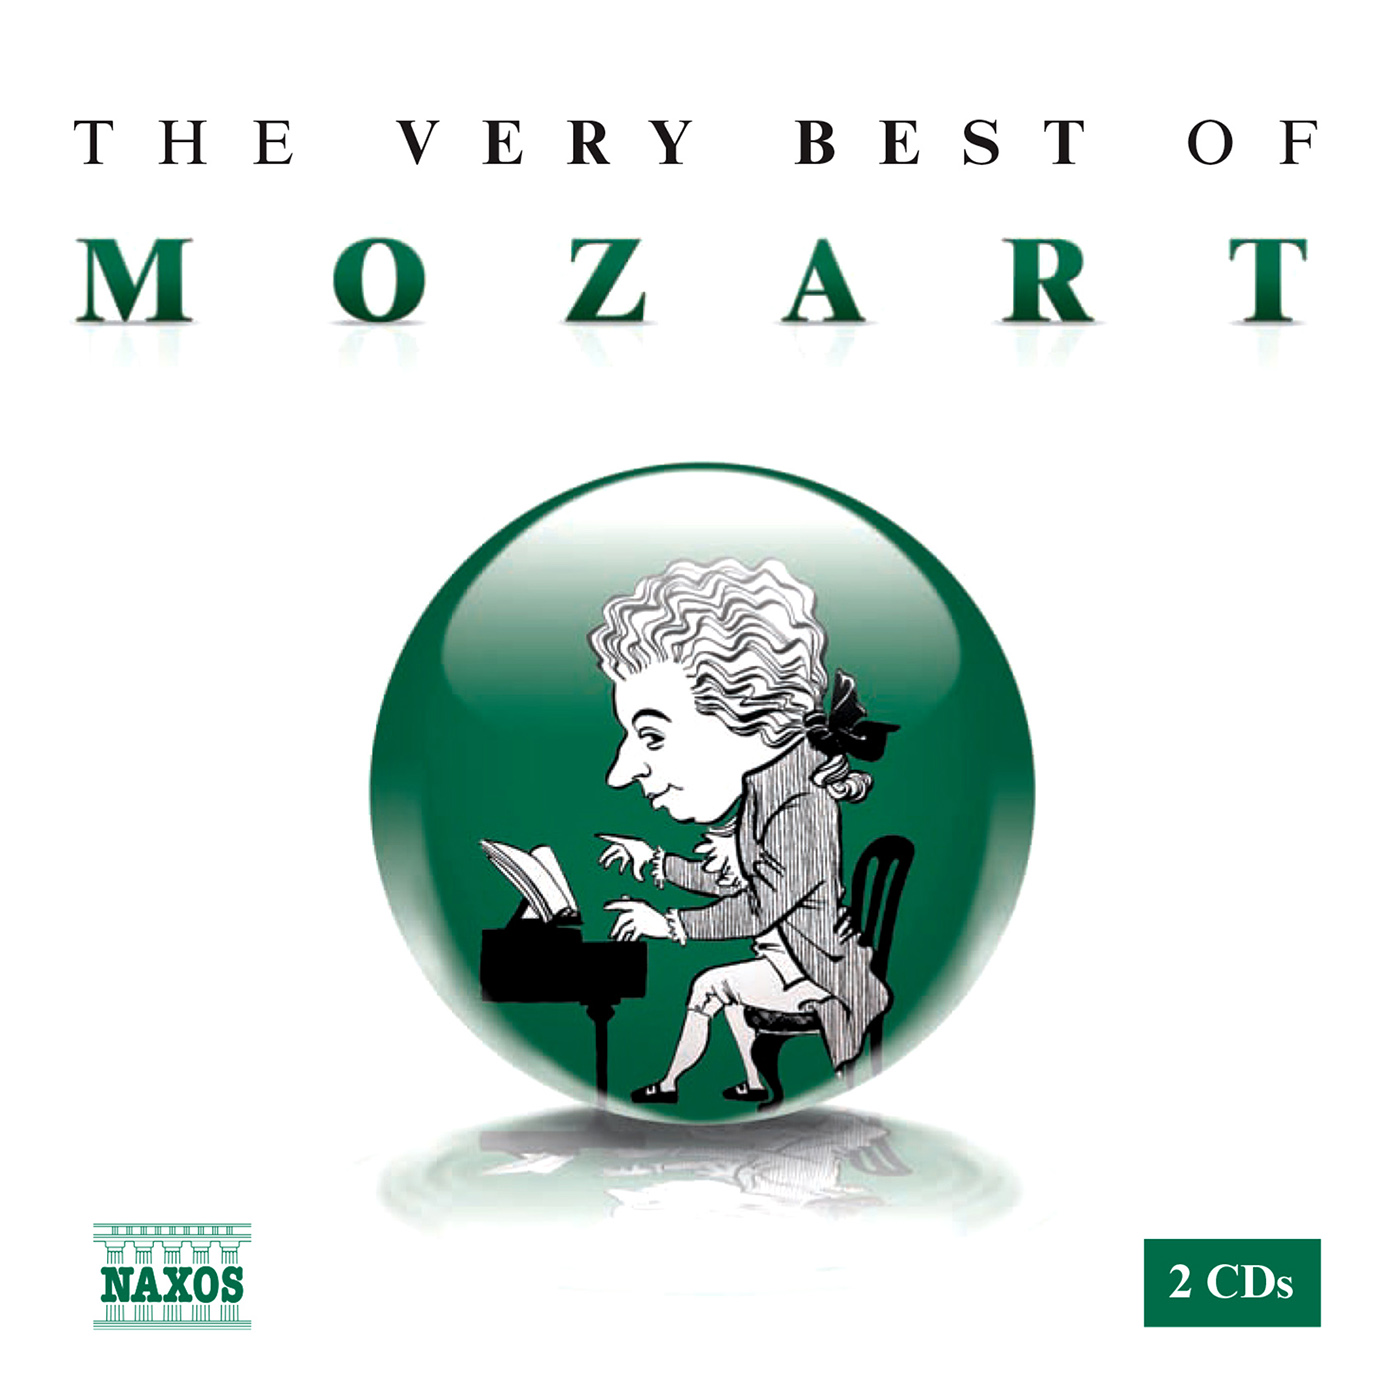 MOZART (THE VERY BEST OF)